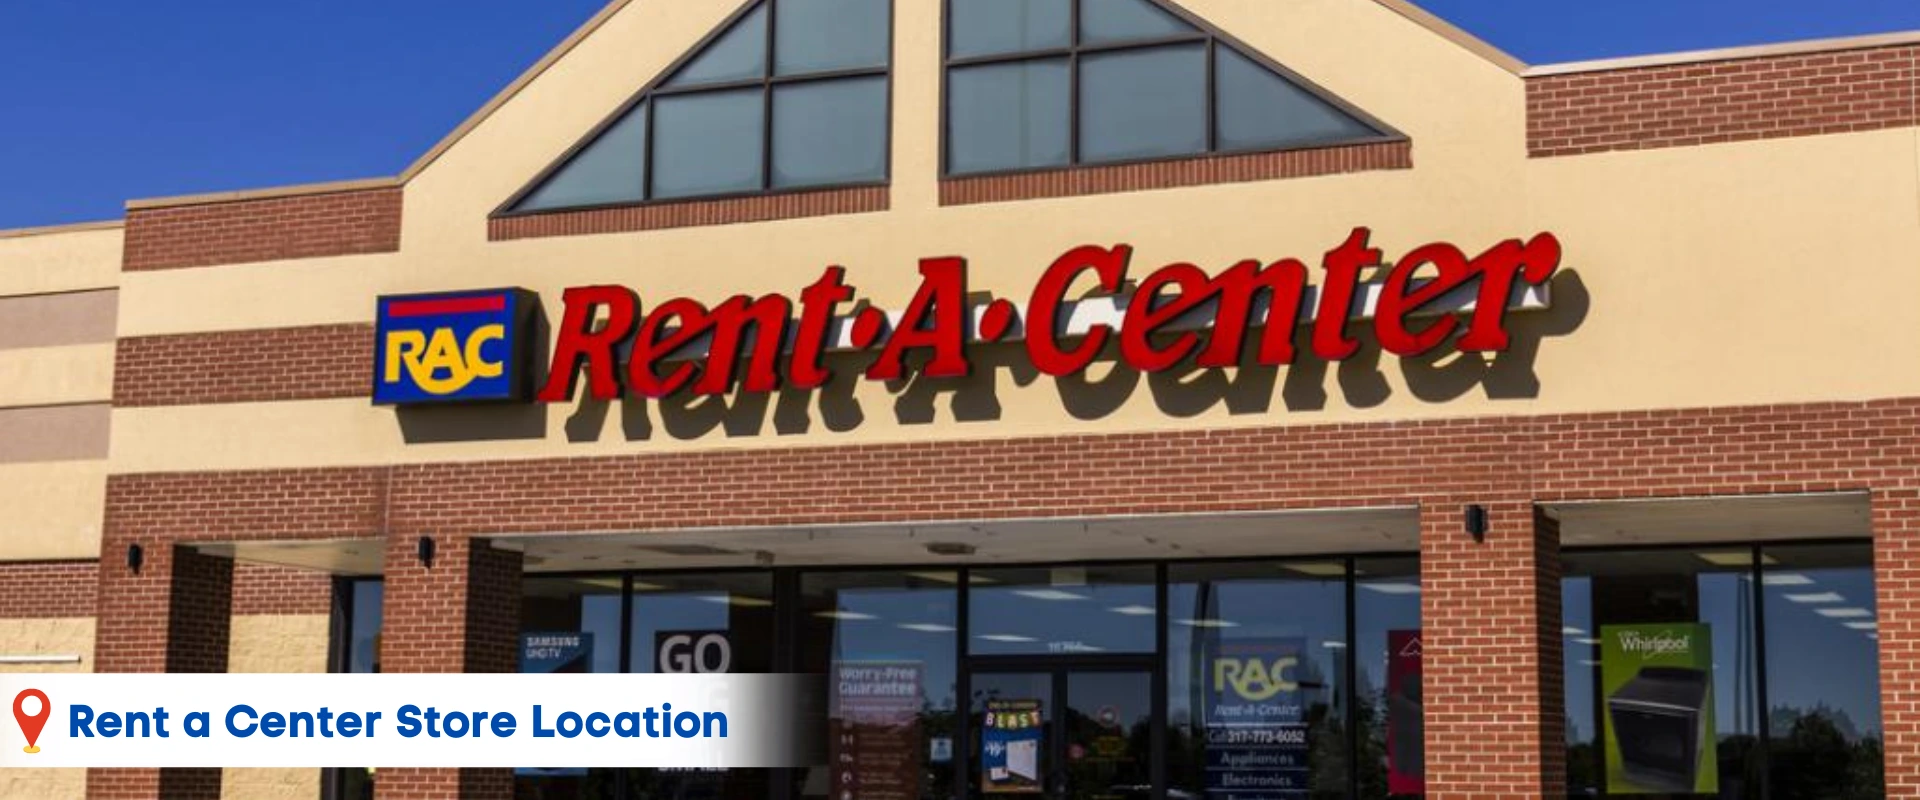 Rent a Center Near Me in Chiefland, FL.